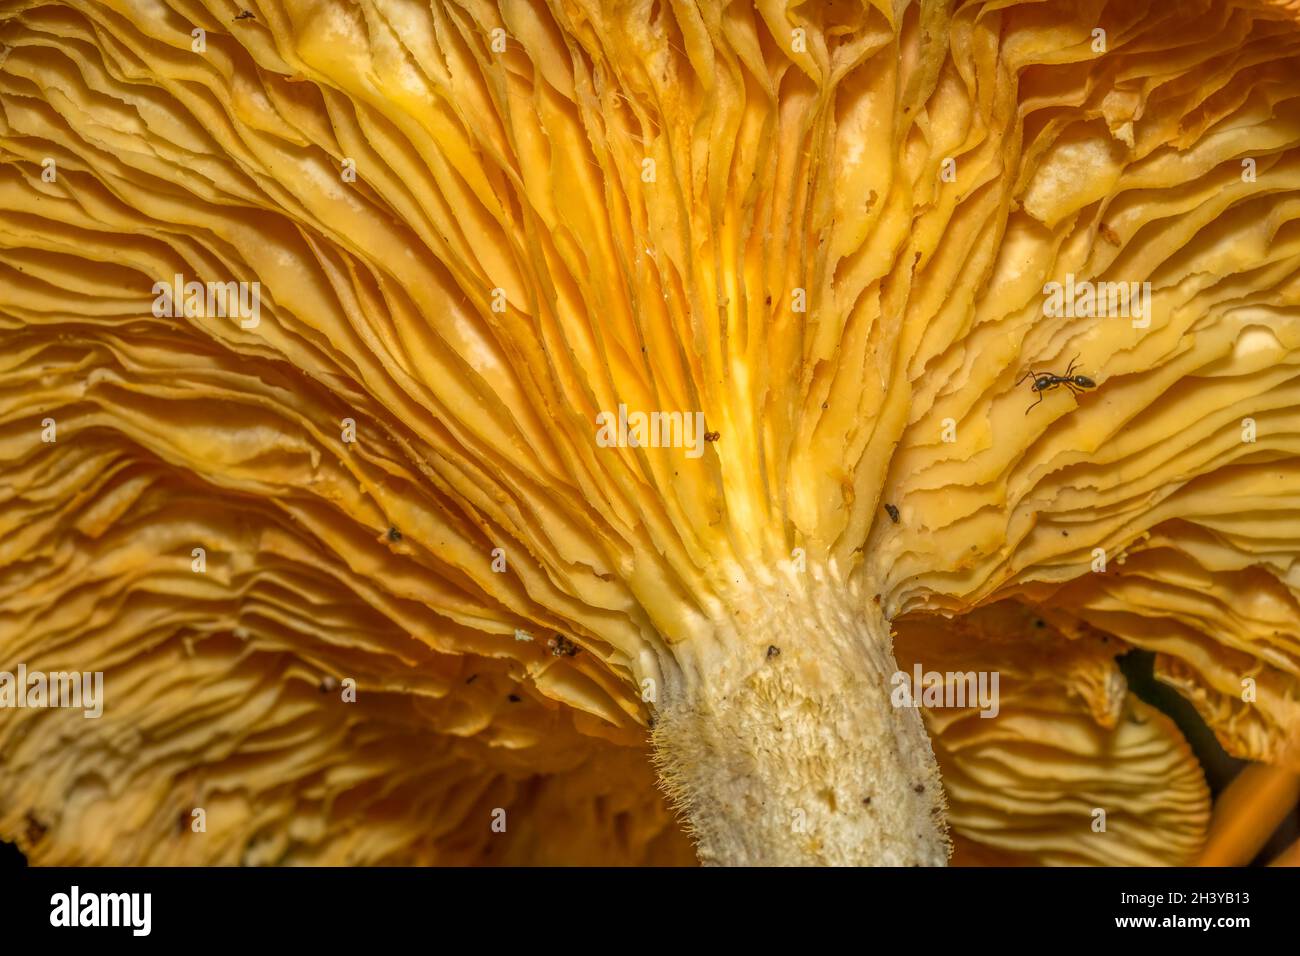 Closeup up view underneath a gilled mushroom, with an ant crawling across. Good for a background. Stock Photo